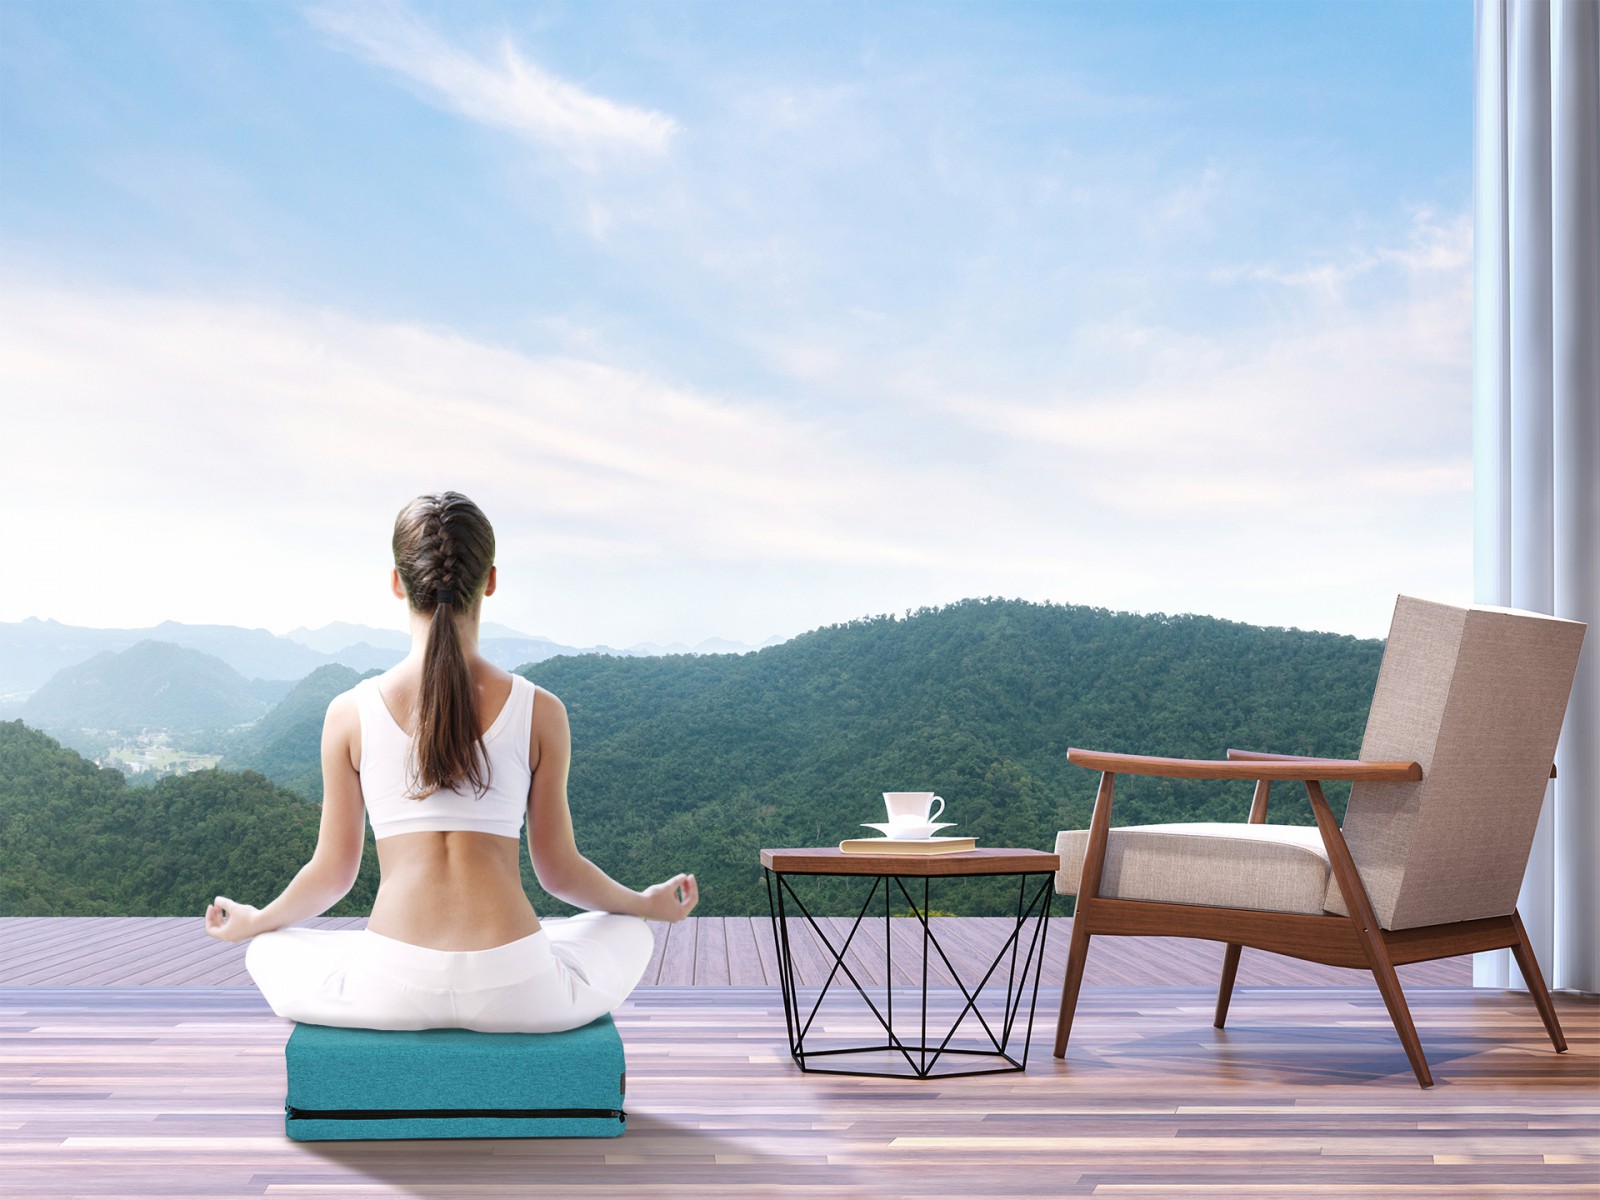 Quelea cushion is design for meditation space outdoor